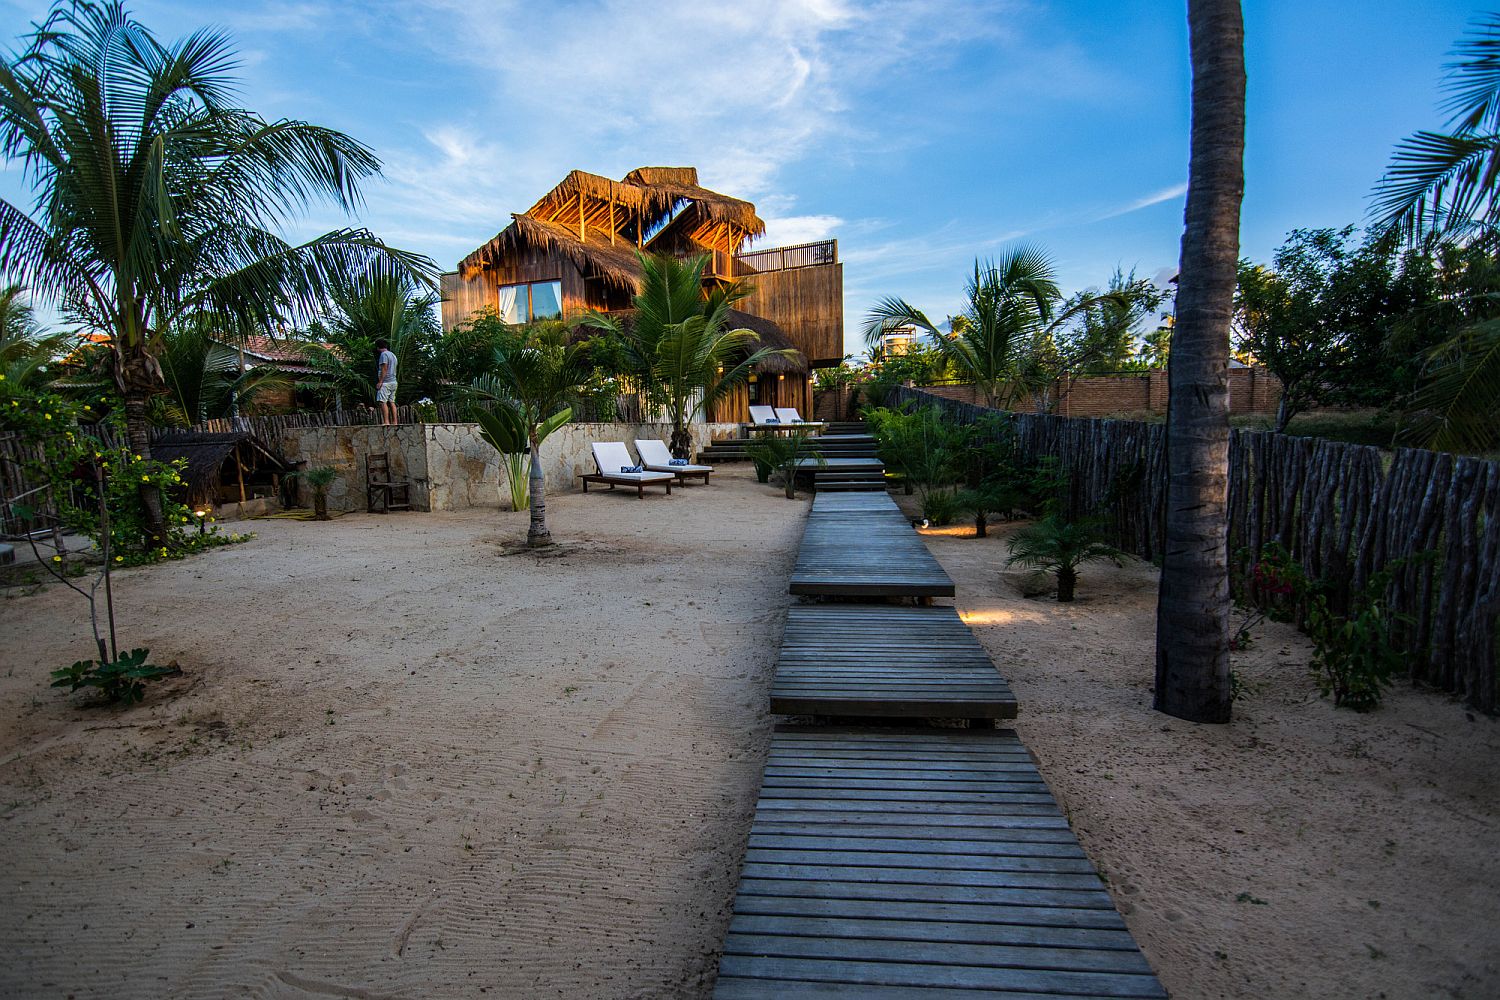 Wooden-walkway-leads-to-the-summe-house-with-modern-beach-style